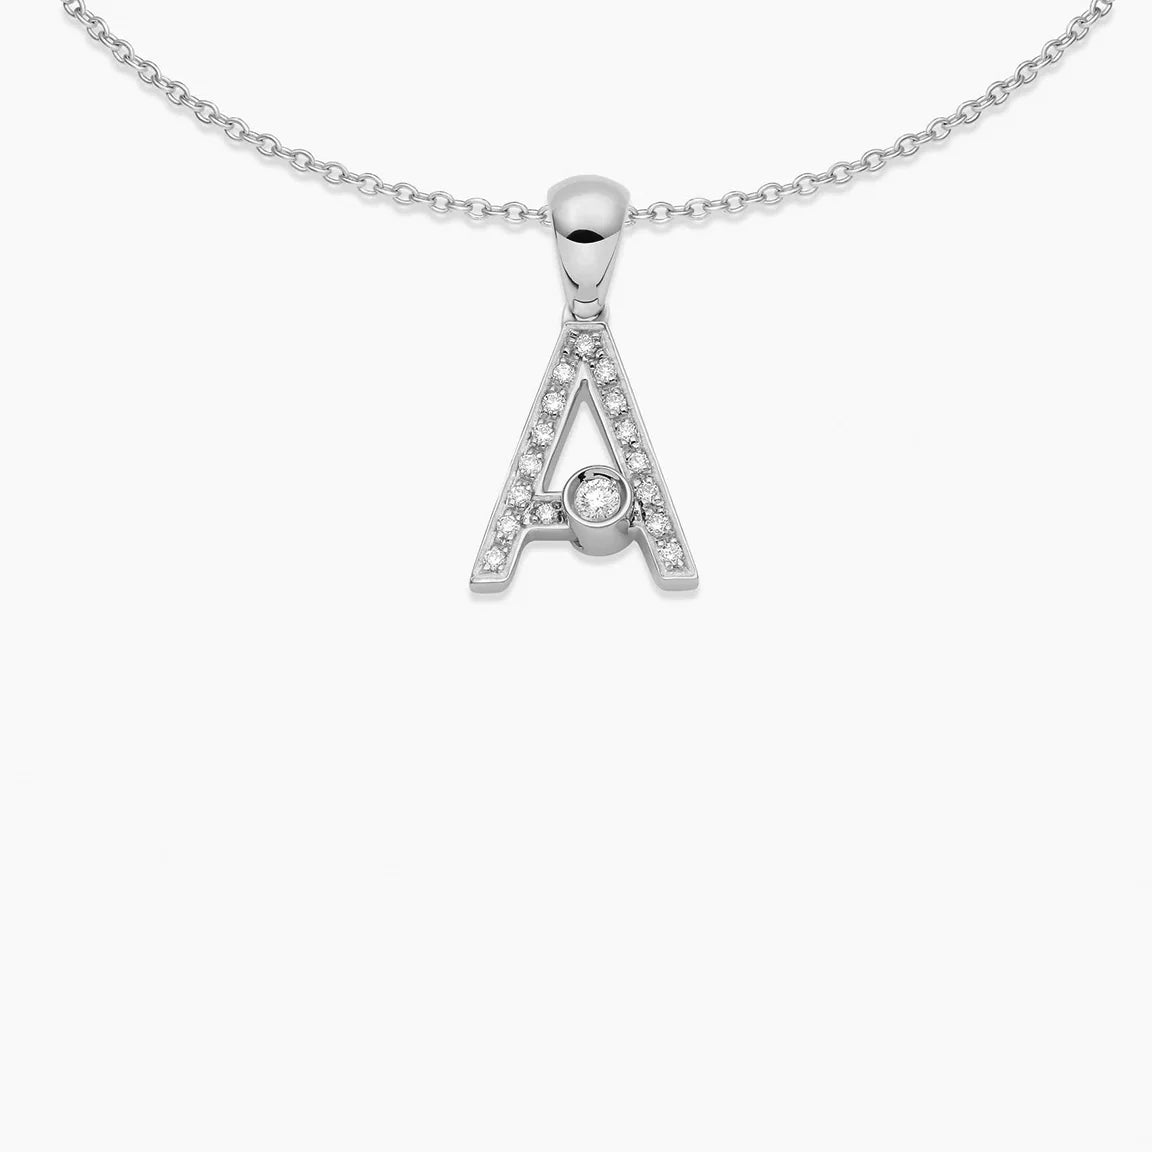 This sleek diamond pave letter pendant has a moving diamond accent that slides from side to side. This pendant comes with an 18kt white gold chain, the length of the chain is 16 inches. Available on FalenaFineJewelry.com or in-store